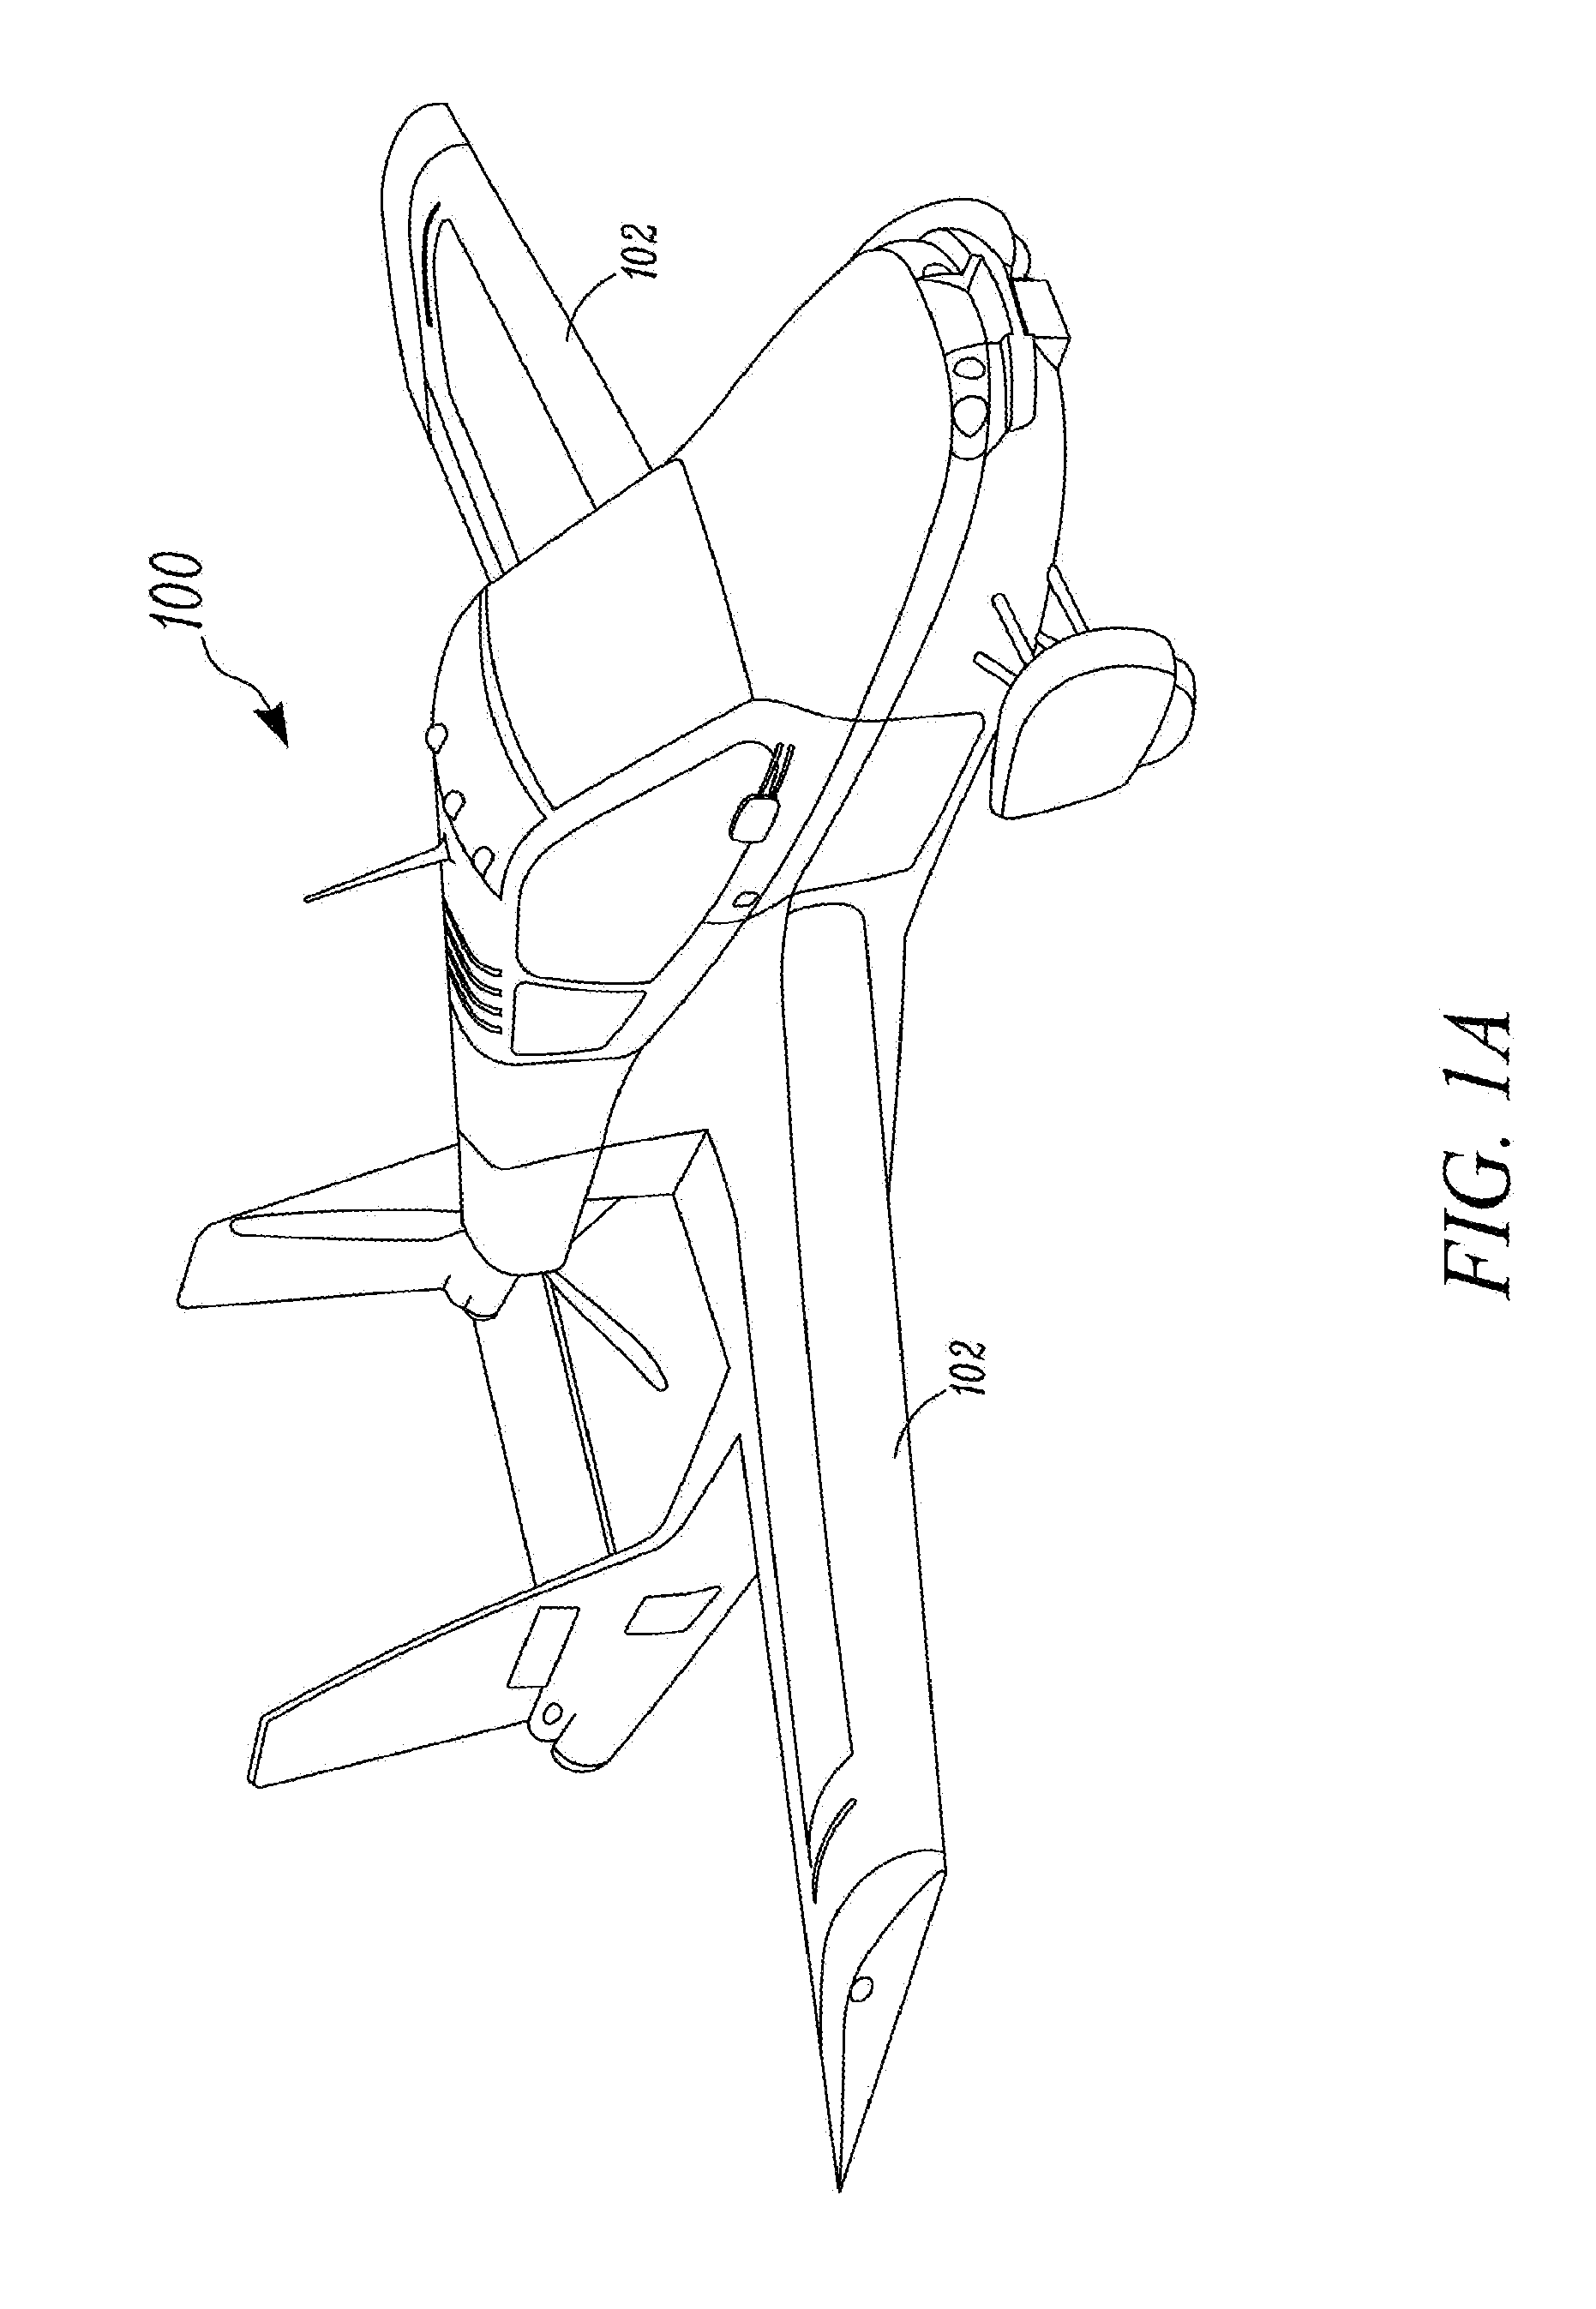 Roadable aircraft and related systems